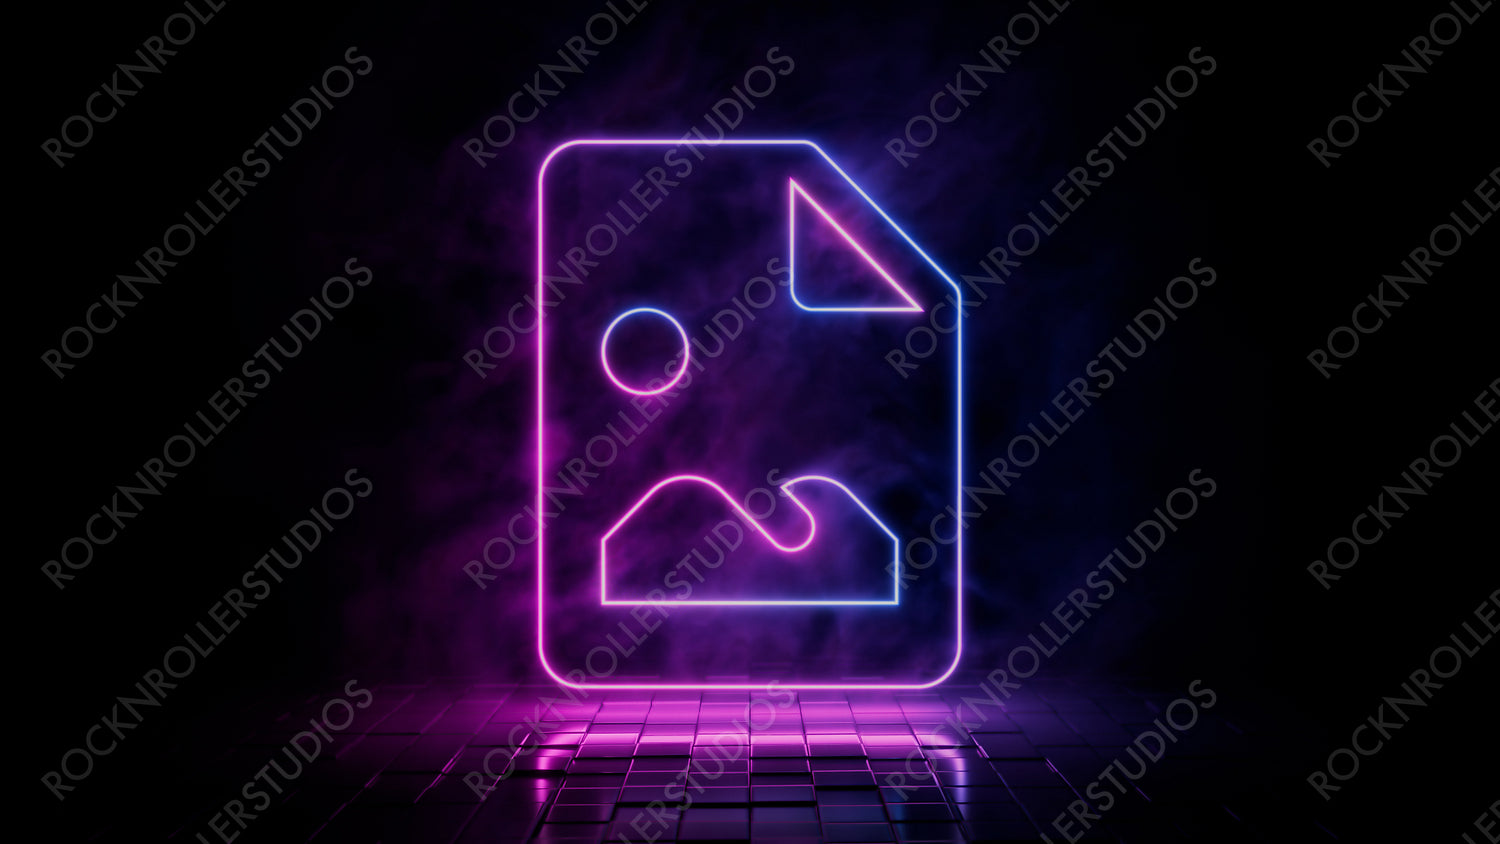 Pink and blue neon light picture icon. Vibrant colored image technology symbol, isolated on a black background. 3D Render